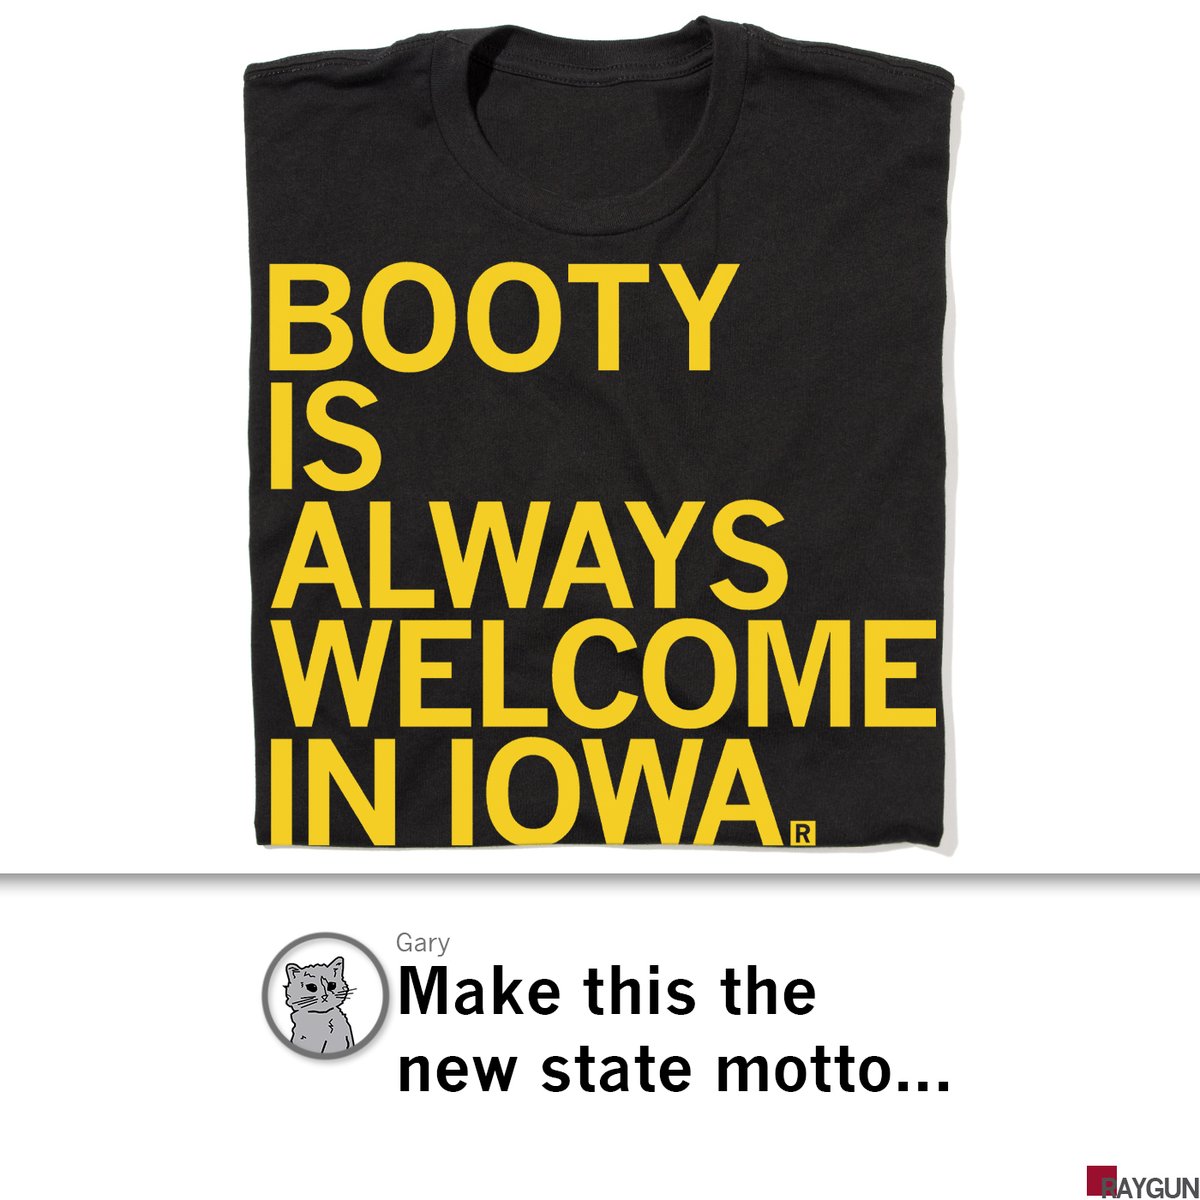 TBH: we don't know much about General Booty's quarterback abilities. but we do know his name abilities are LIMITLESS. New #raygun shirt online to let @Generalbooty10 (and all booty) know that they are always welcome in Iowa: raygunsite.com/collections/io… twitter.com/PeteNakos_/sta…